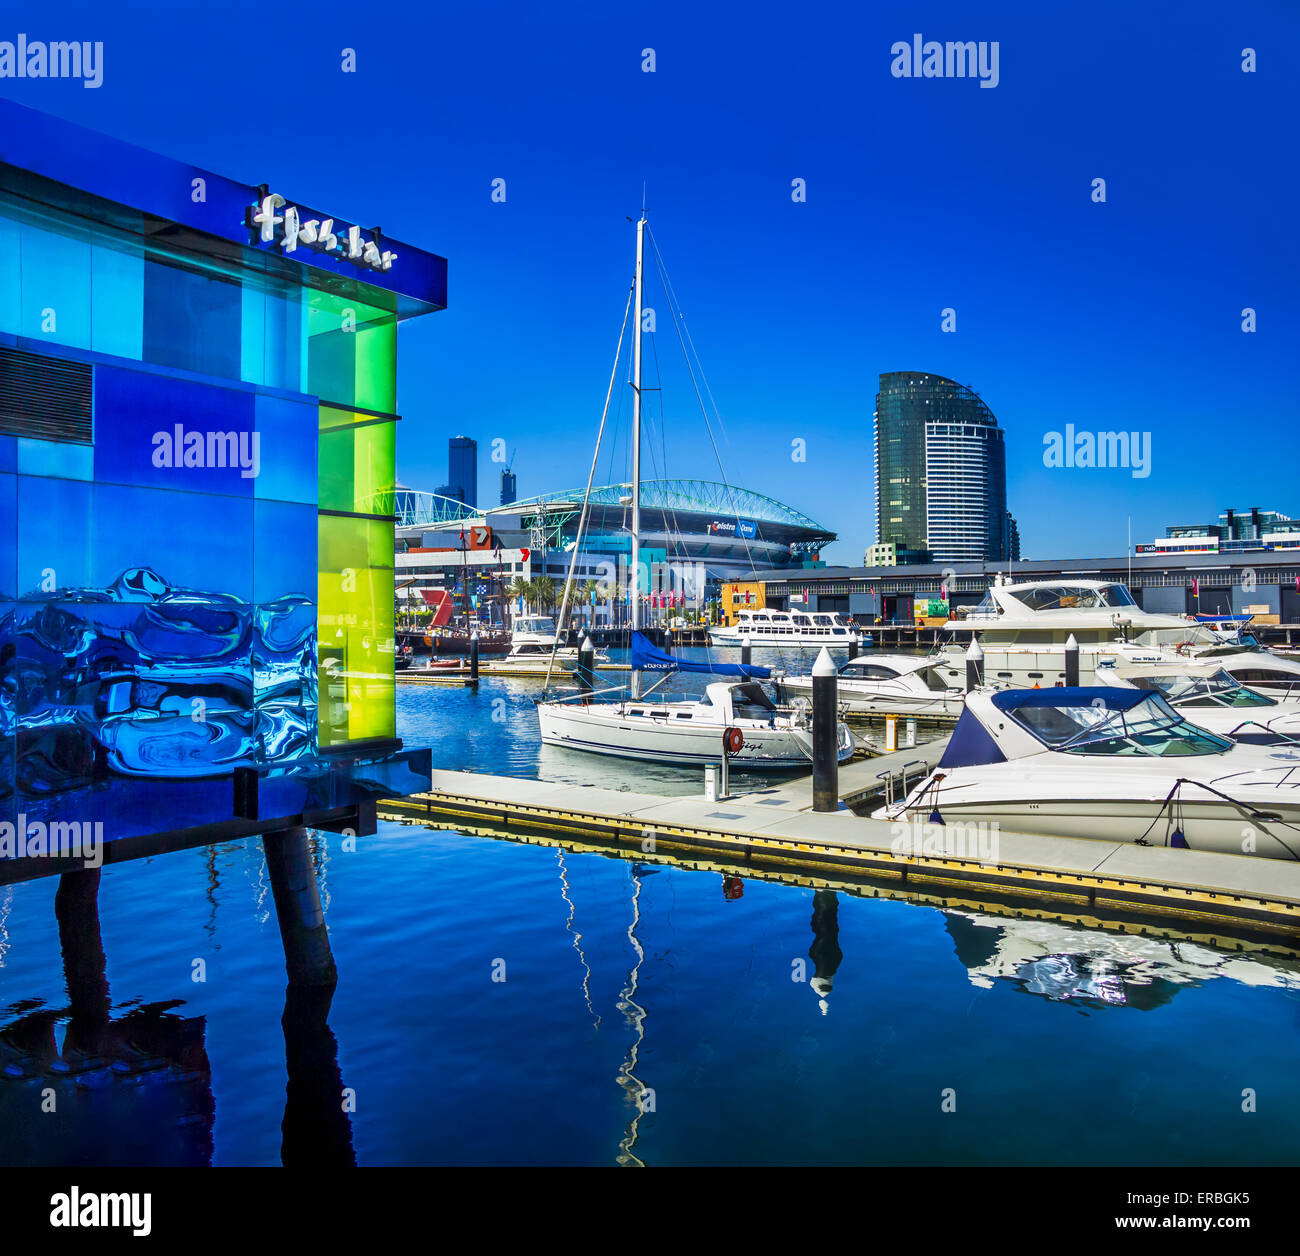 Bright blue colourful Fish bar and yachts in Docklands Marina, Melbourne Australia Stock Photo